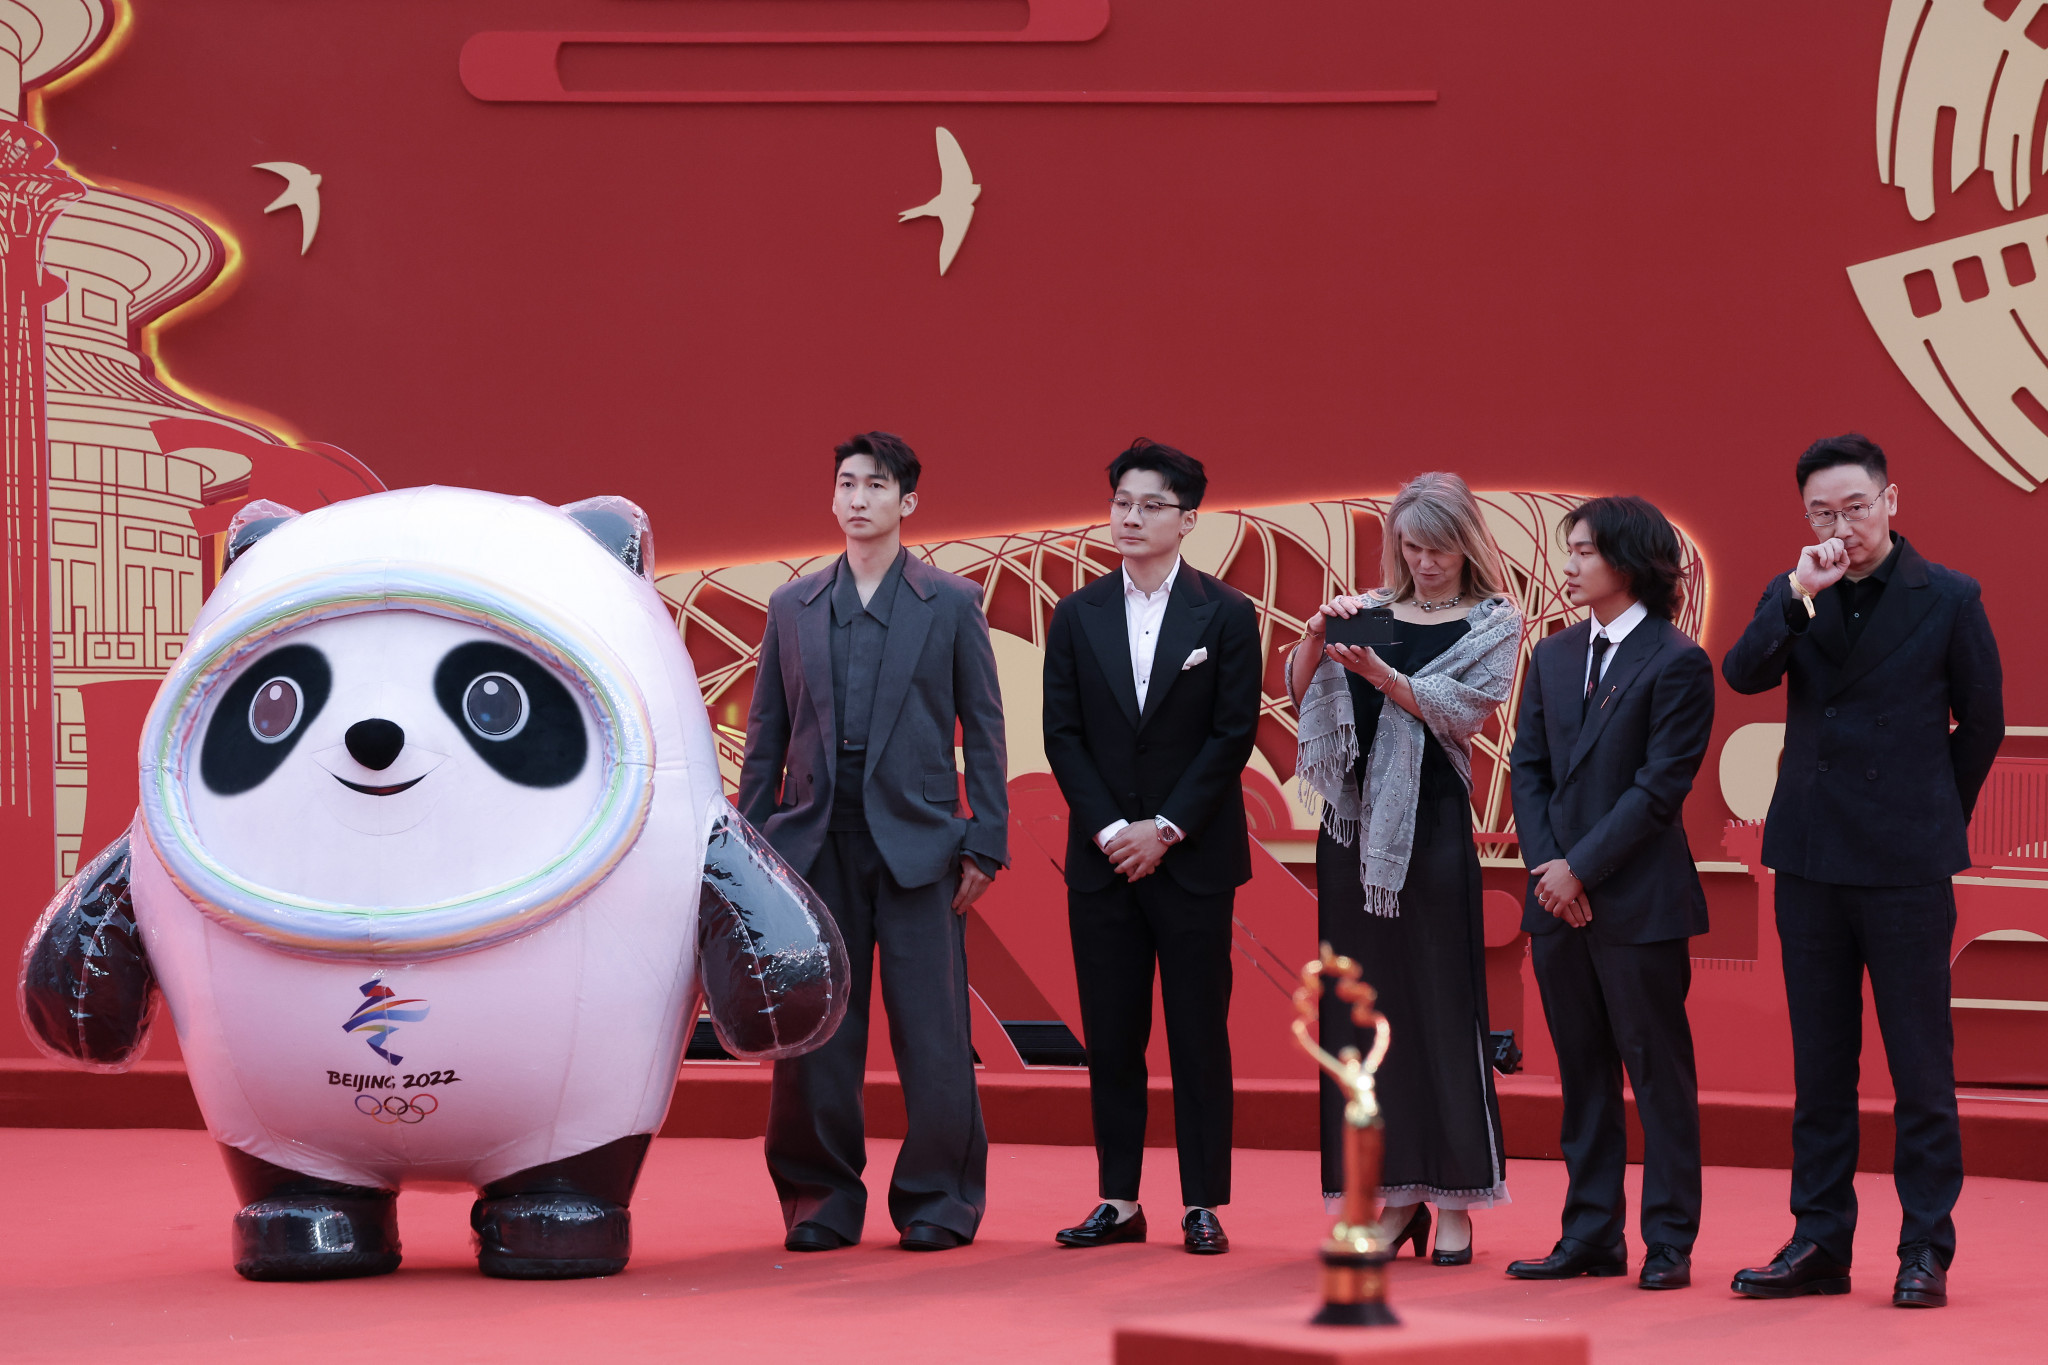 Olympic champions attend premiere of official Beijing 2022 film 